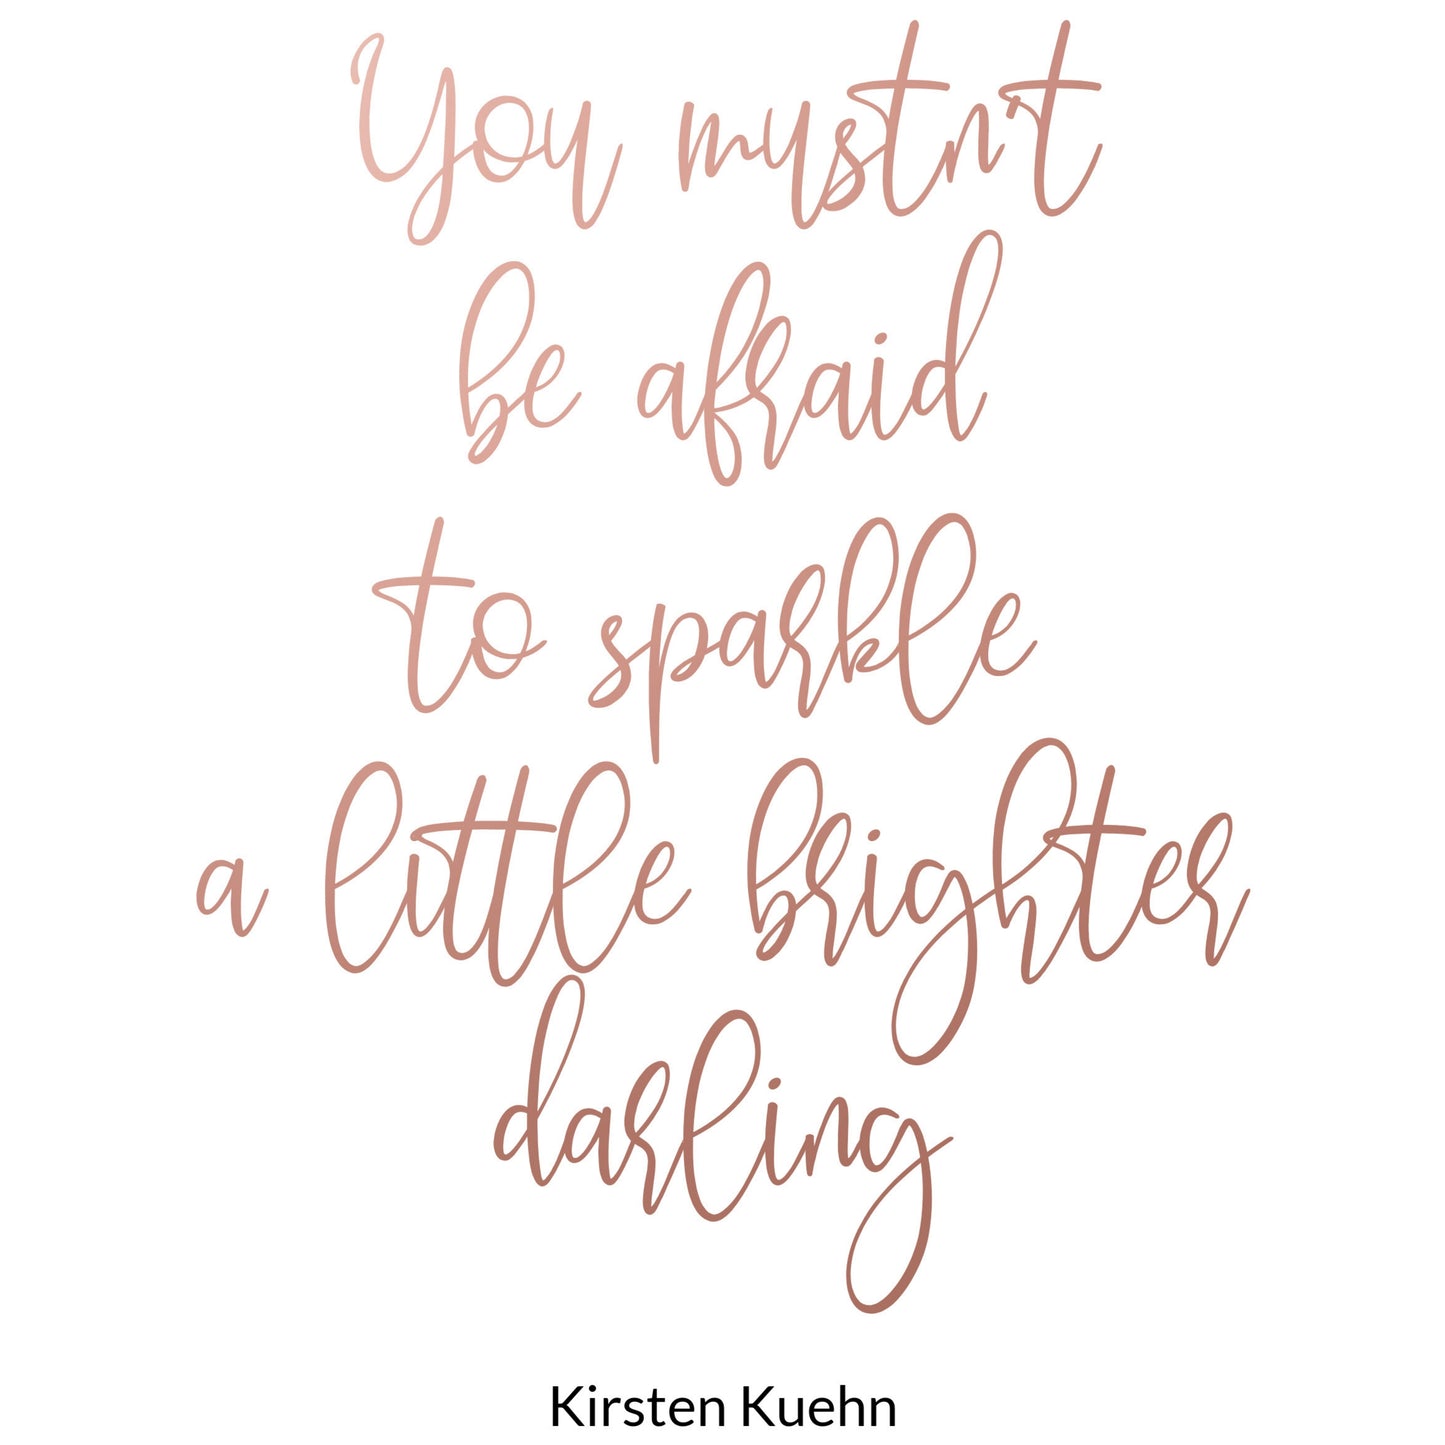 "You Mustn't Be Afraid To Sparkle A Little Brighter Darling," Famous Quote By Kirsten Kuehn In Rose Gold, Printable Art